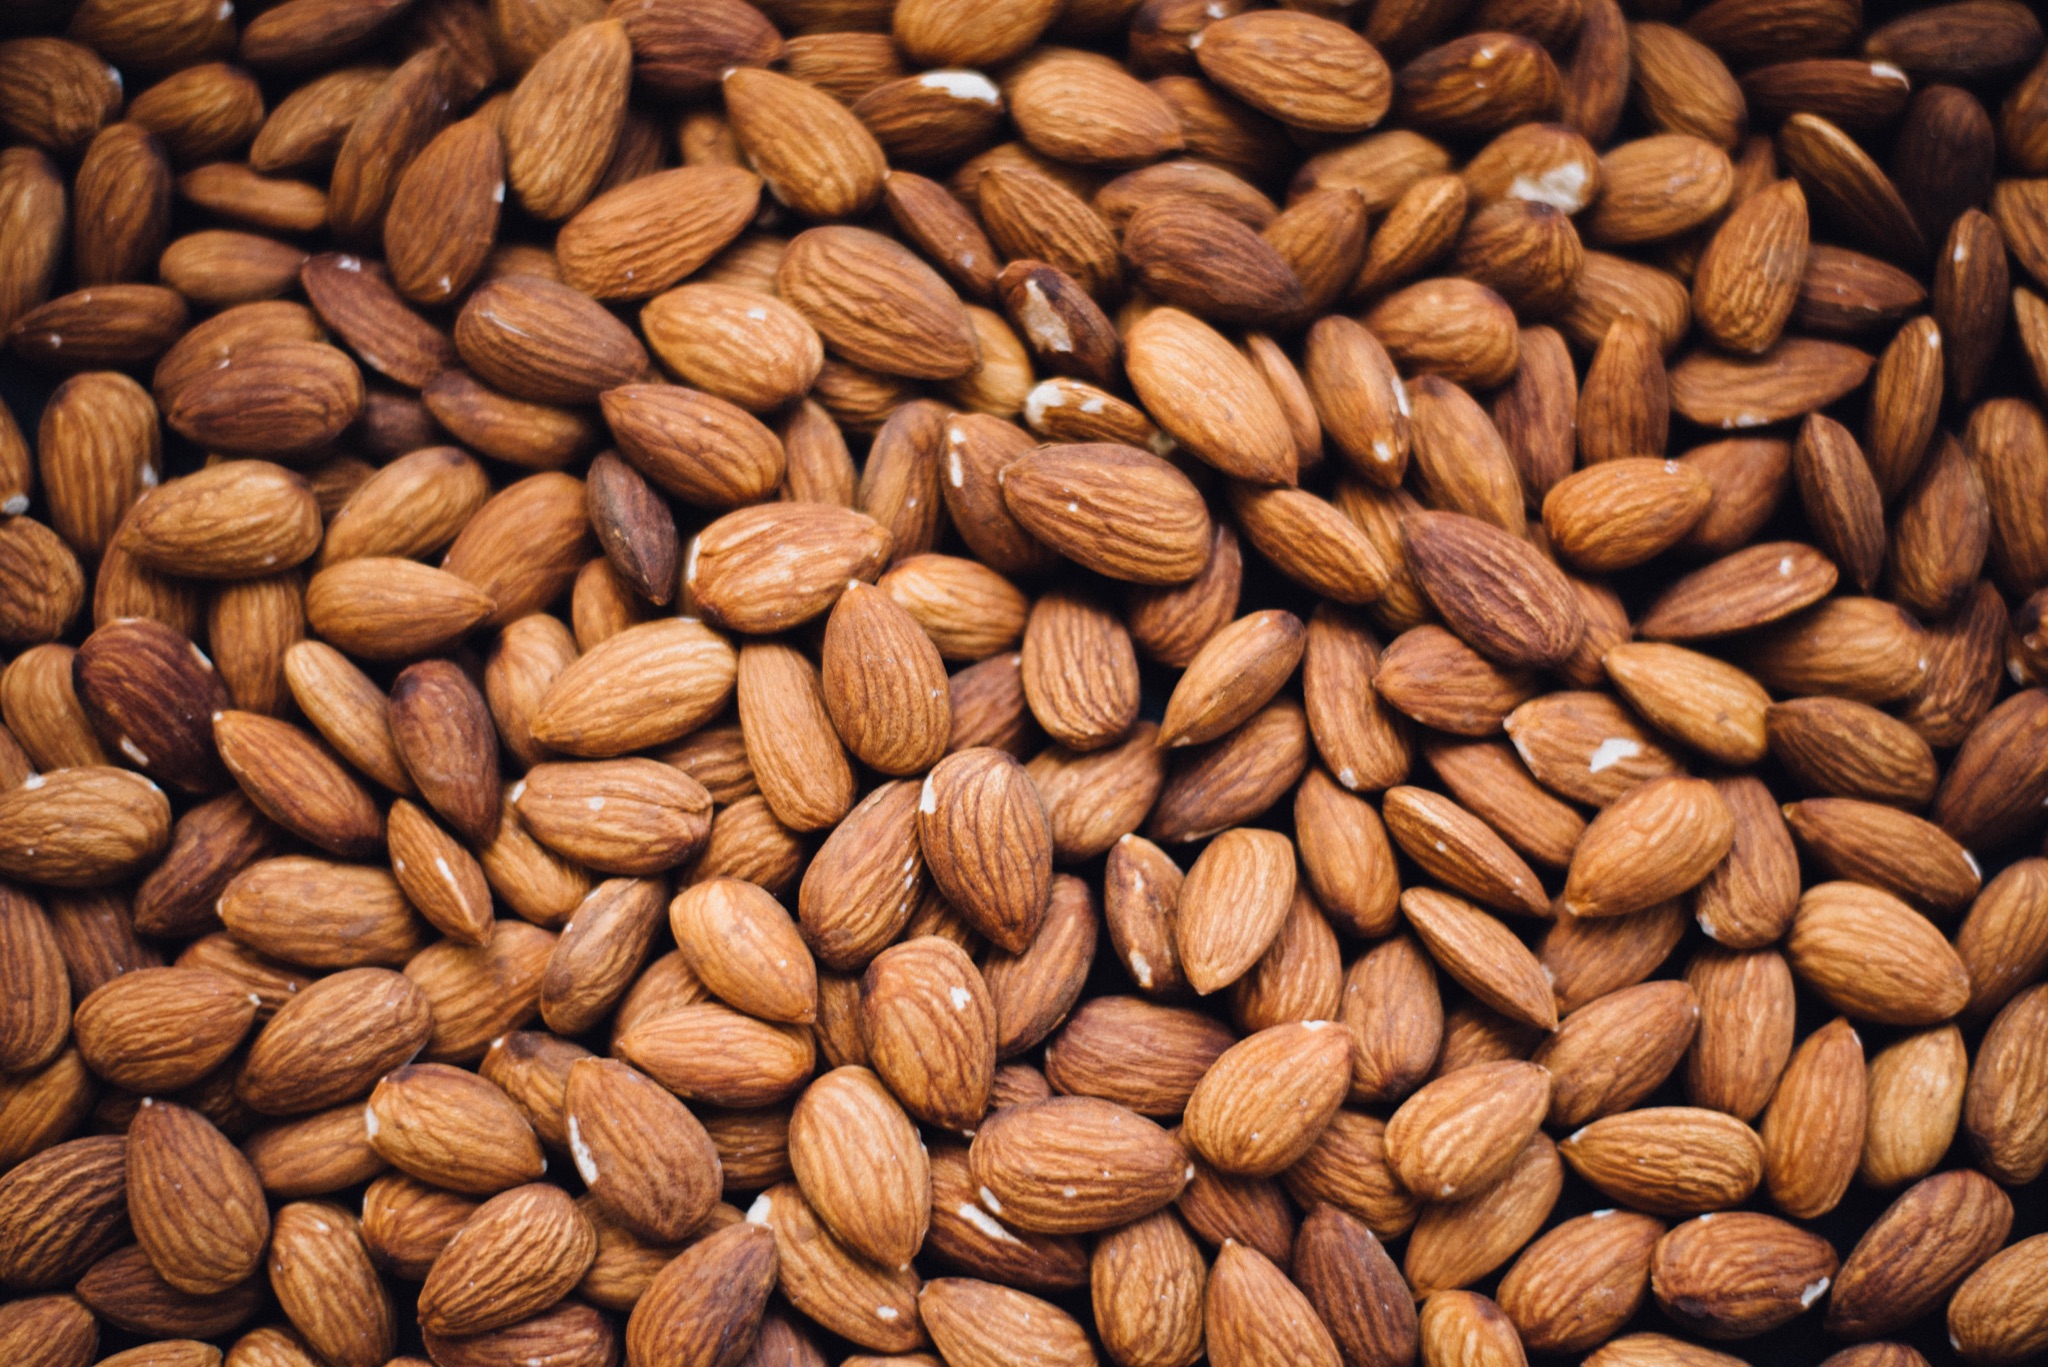 Healthy Mom Blogger 2022 Family Influencer discusses healthy foods for mental health - this is an almond